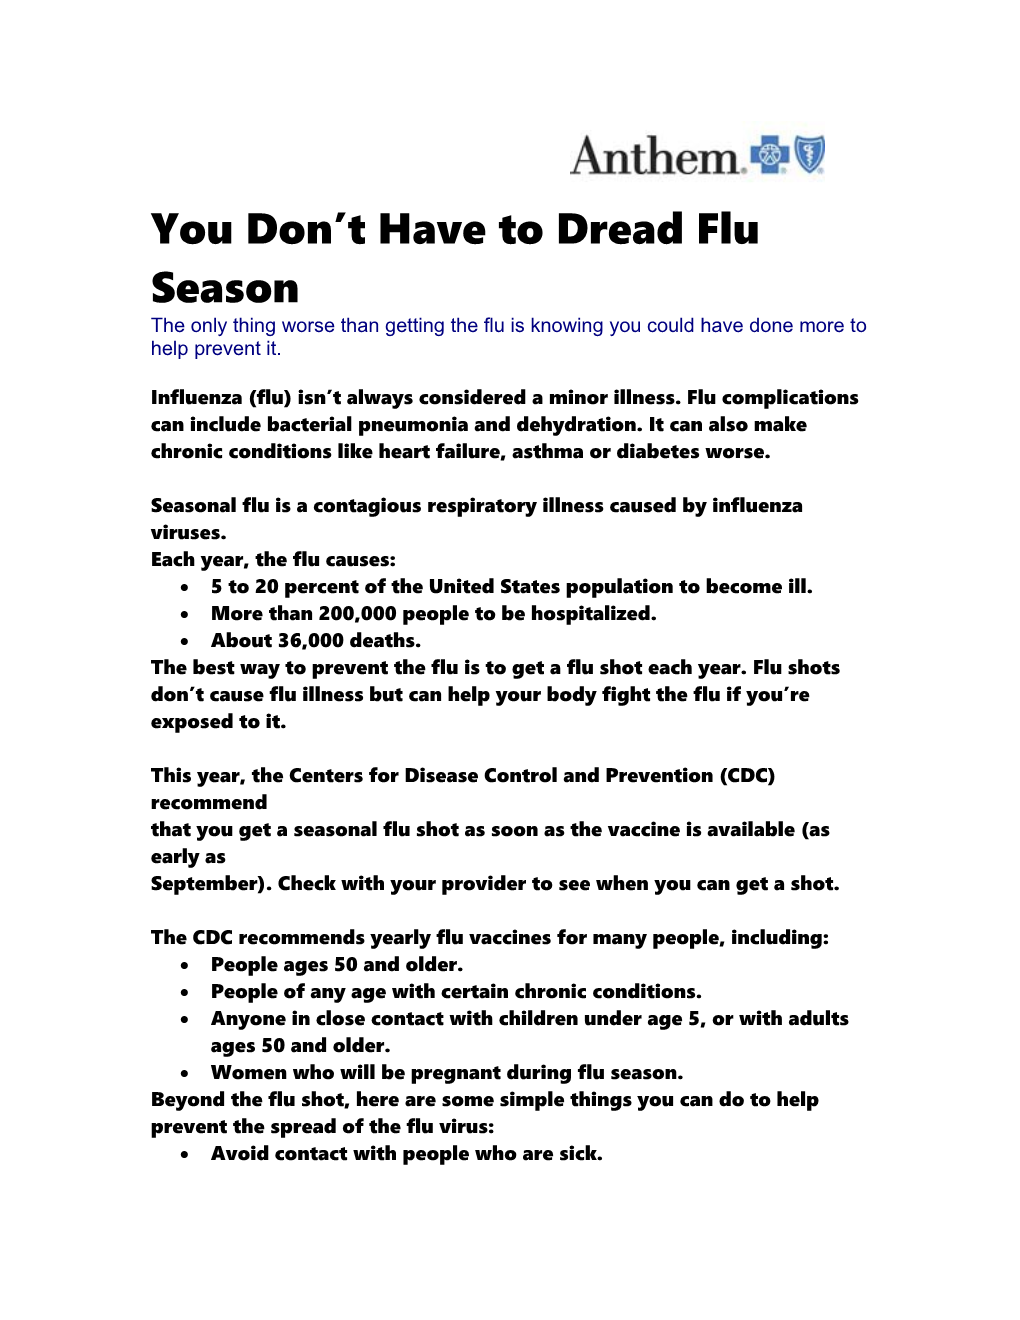 You Don T Have to Dread Flu Season